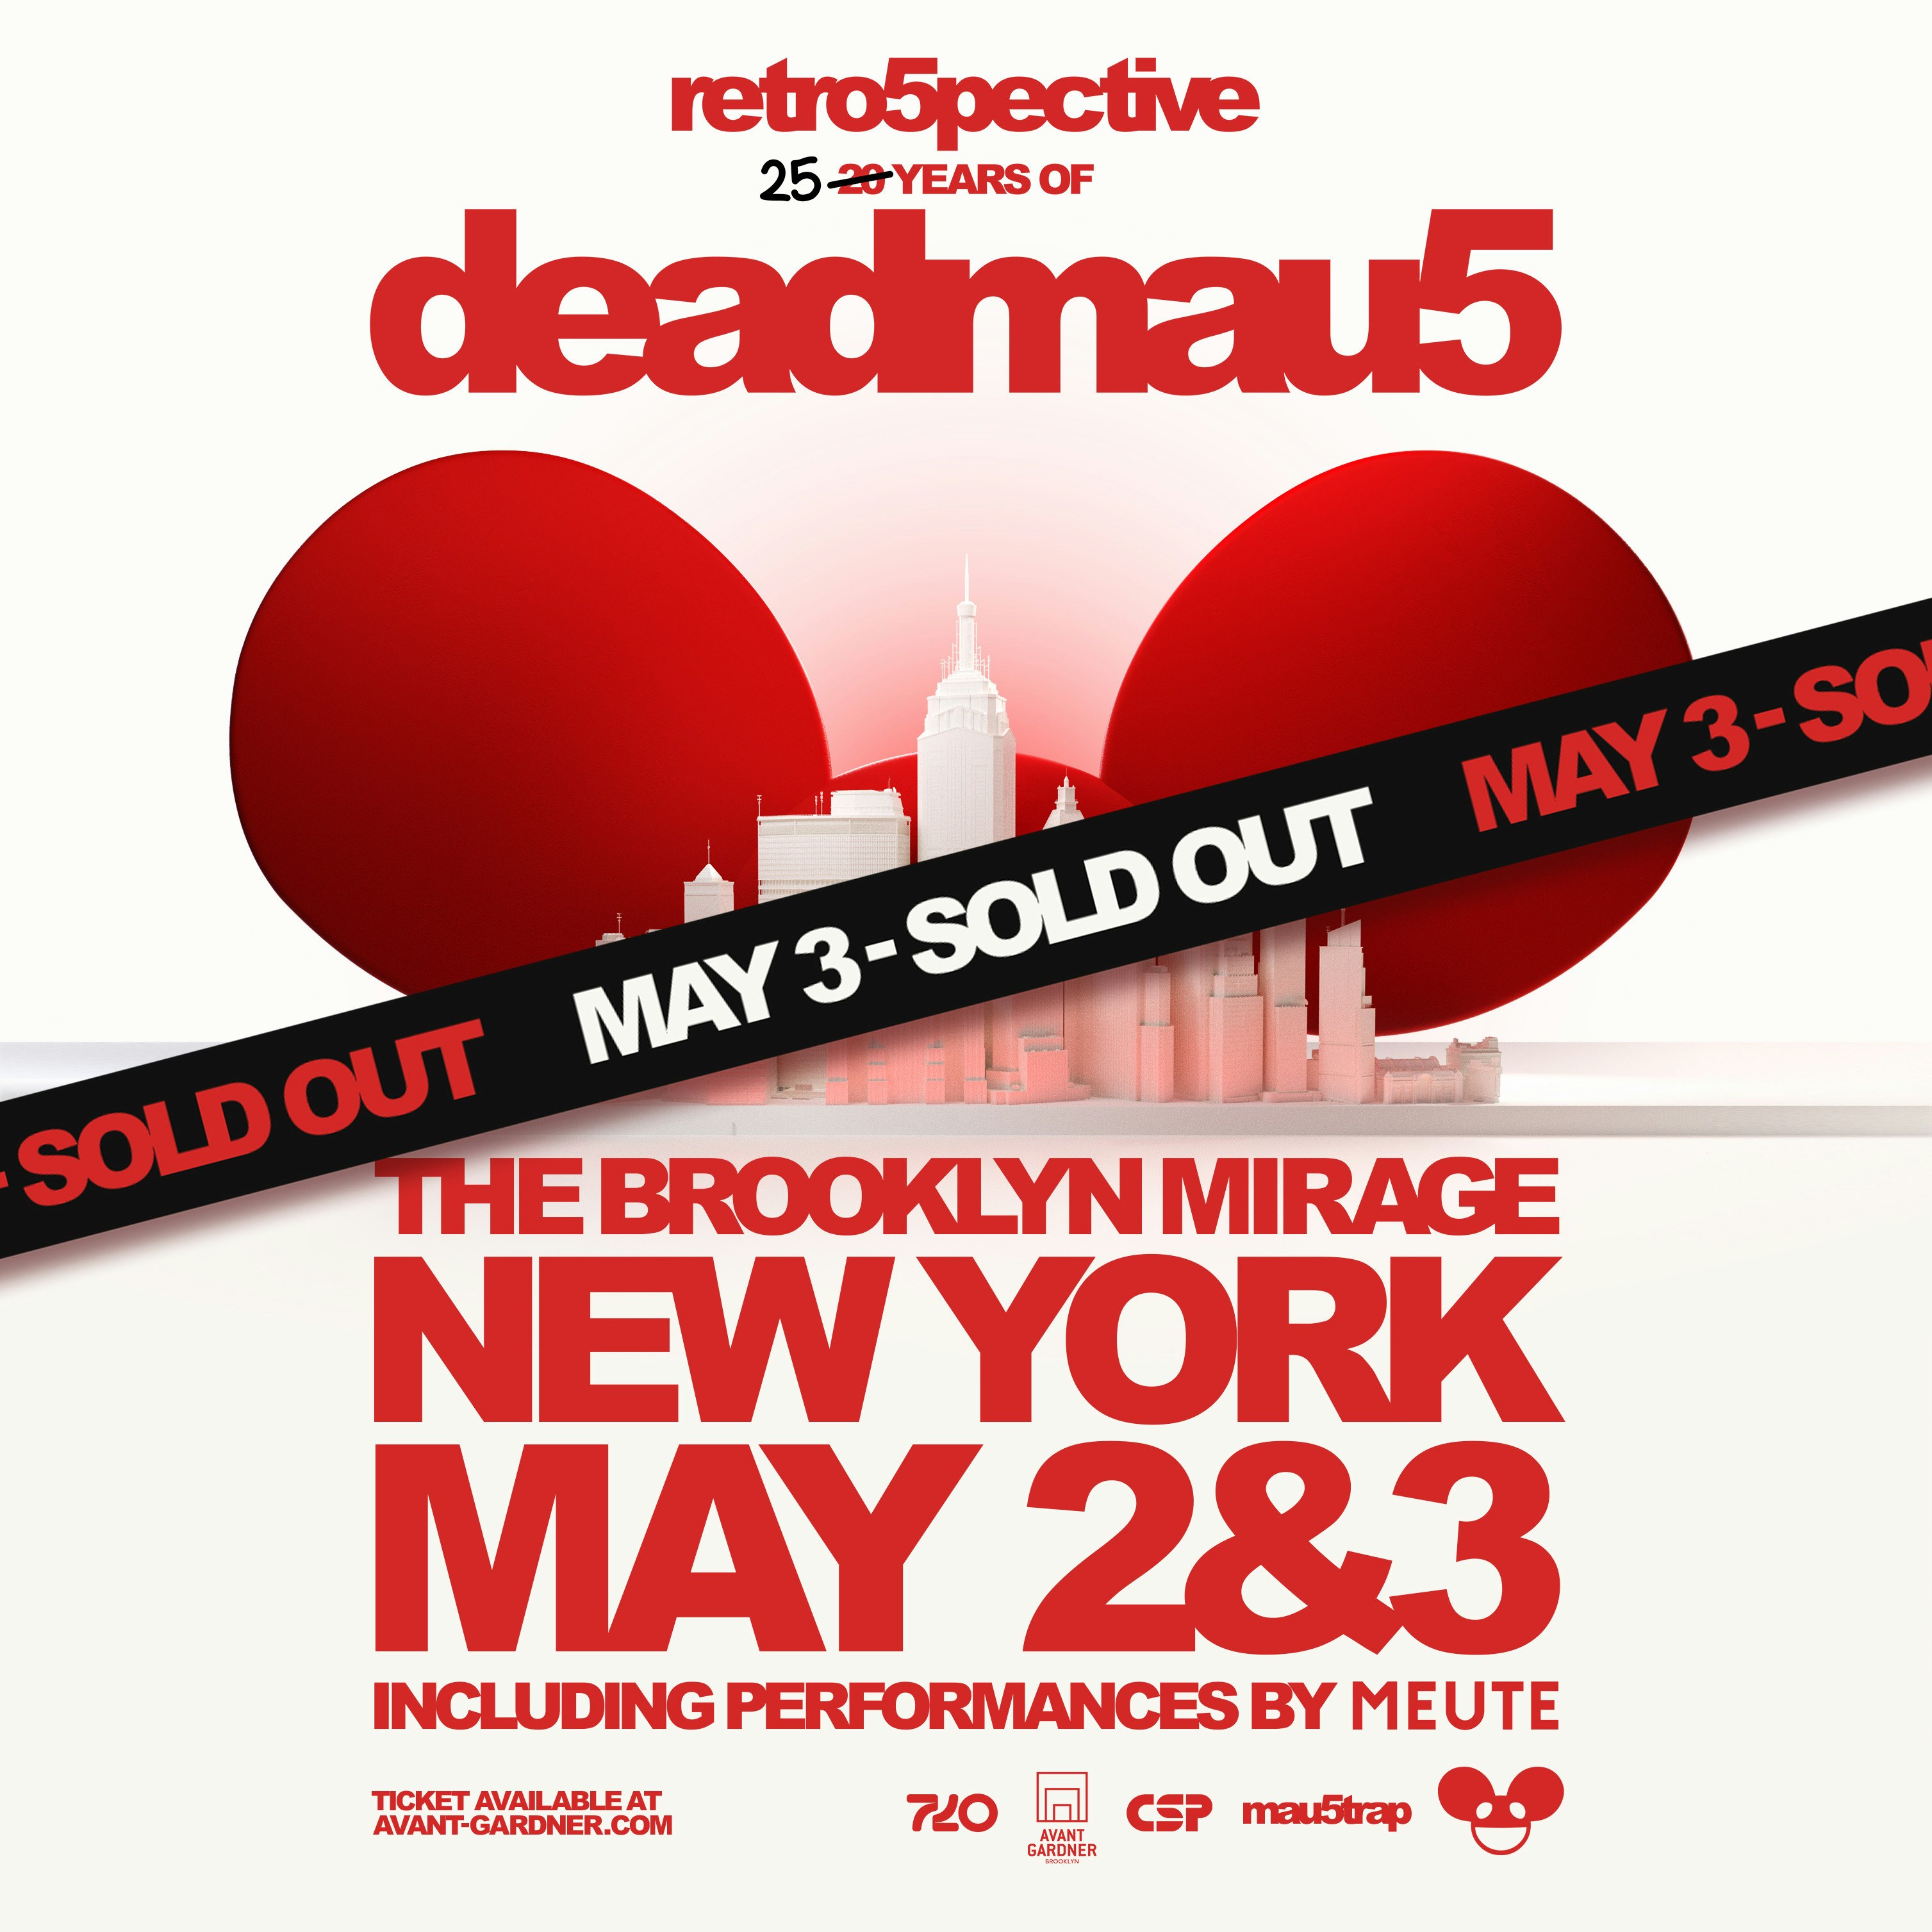 retro5pective: 20 years of deadmau5 Tickets | From $103.52 | 3 May